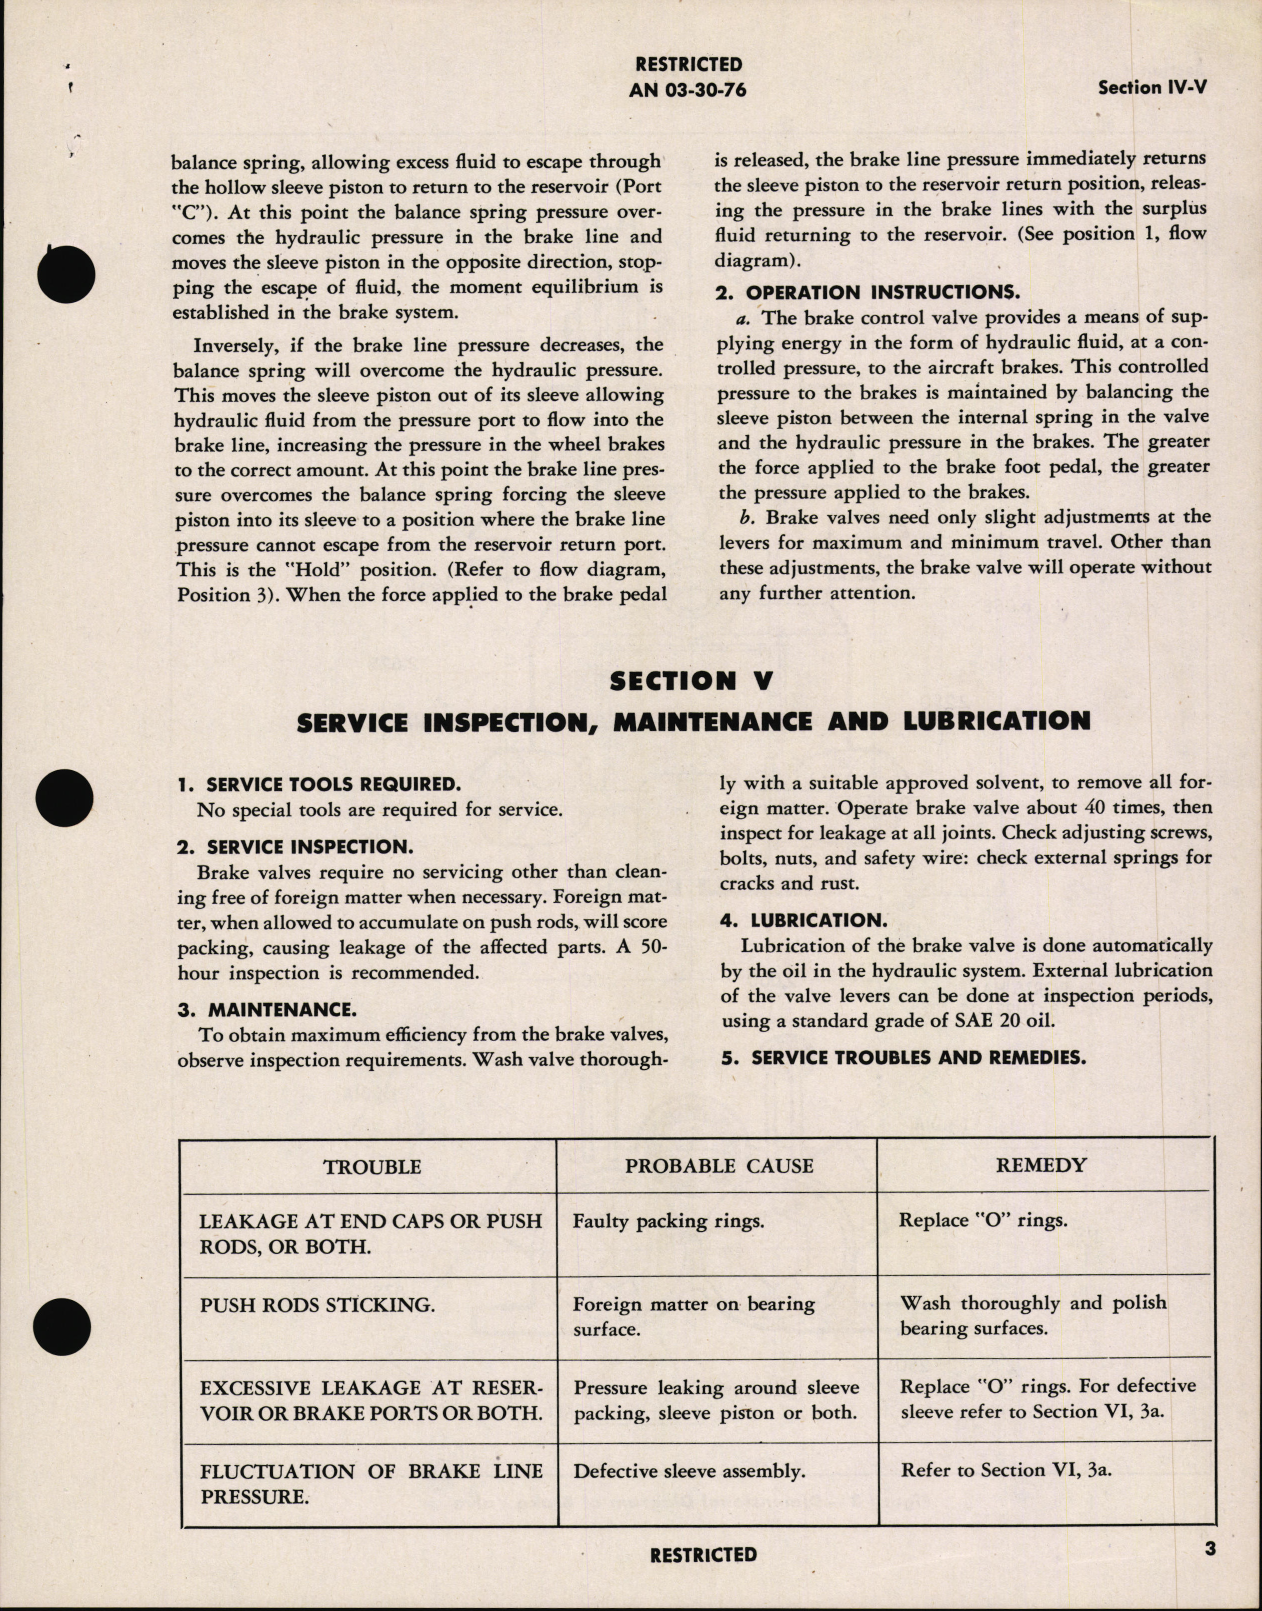 Sample page 7 from AirCorps Library document: Handbook of Instructions with Parts Catalog for Type 36034A and 36034B Brake Valves